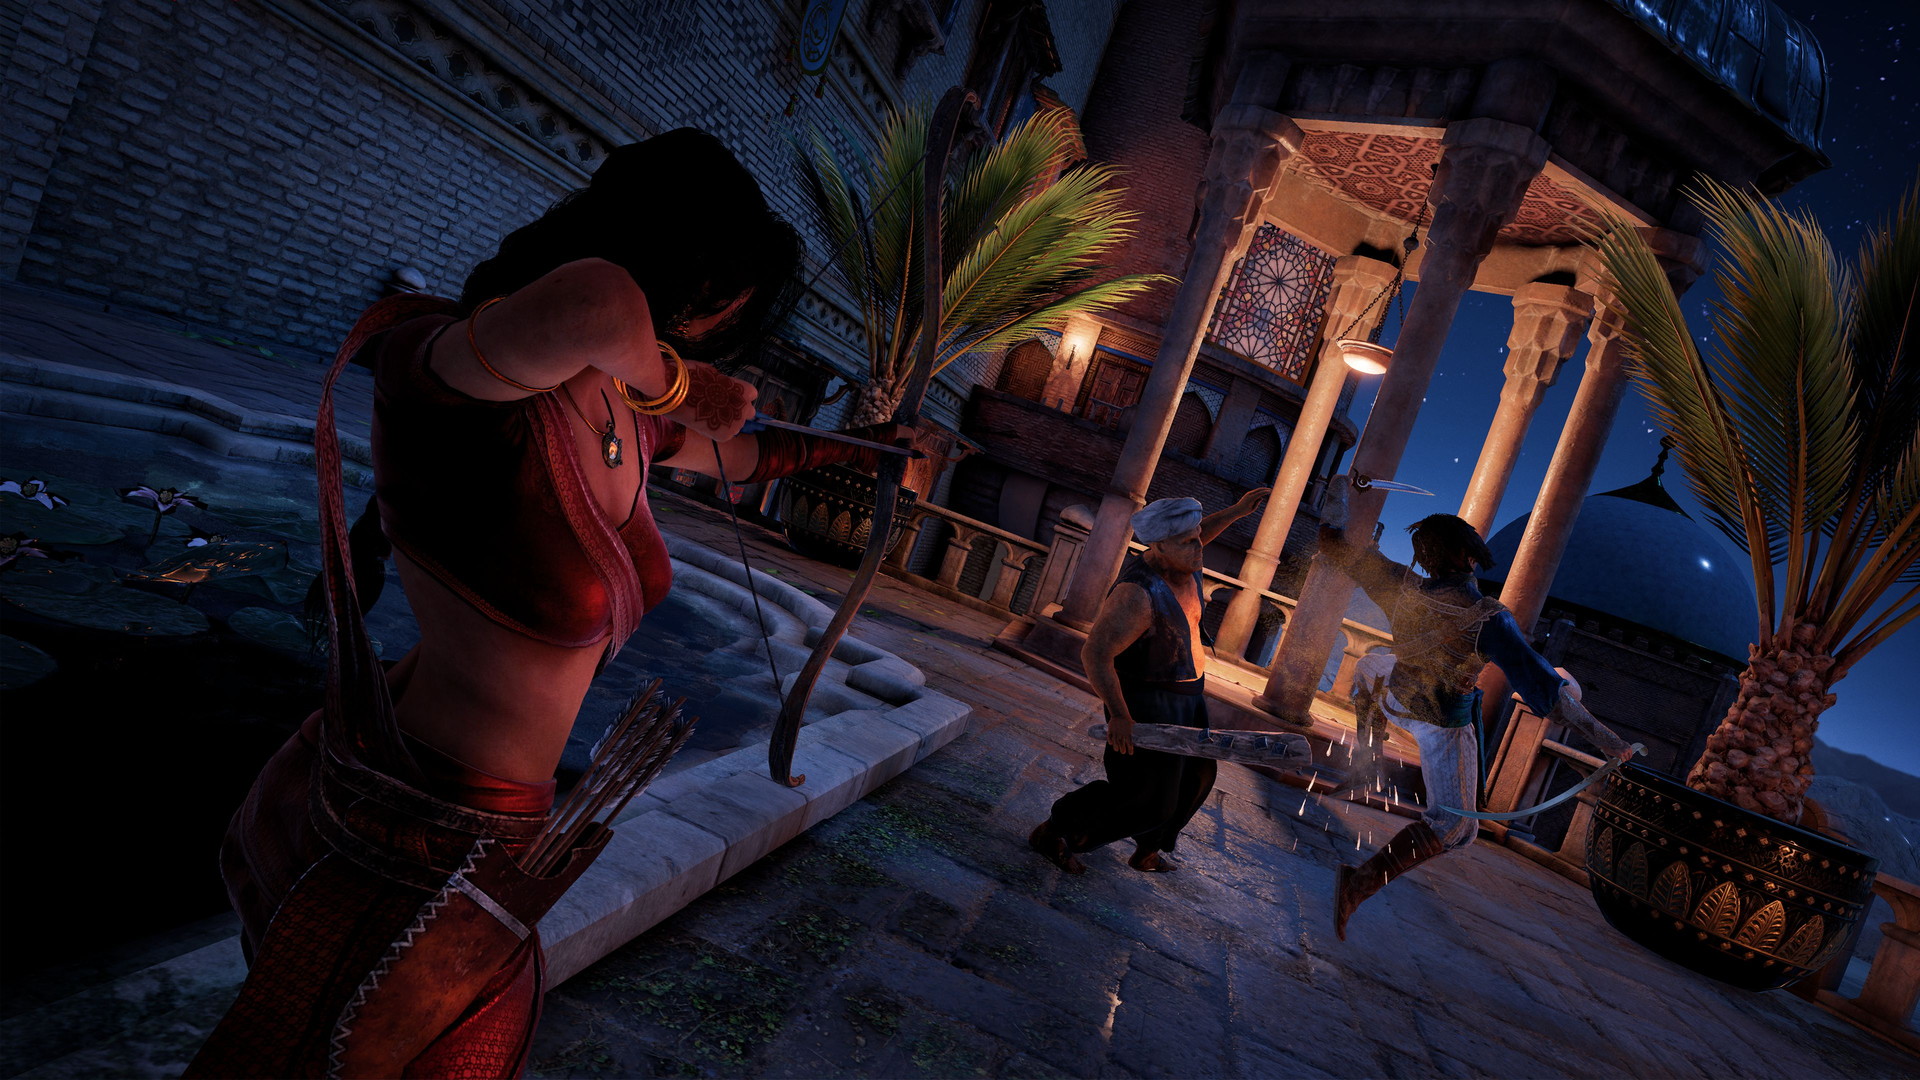 Prince of Persia: The Sands of Time Remake - screenshot 3